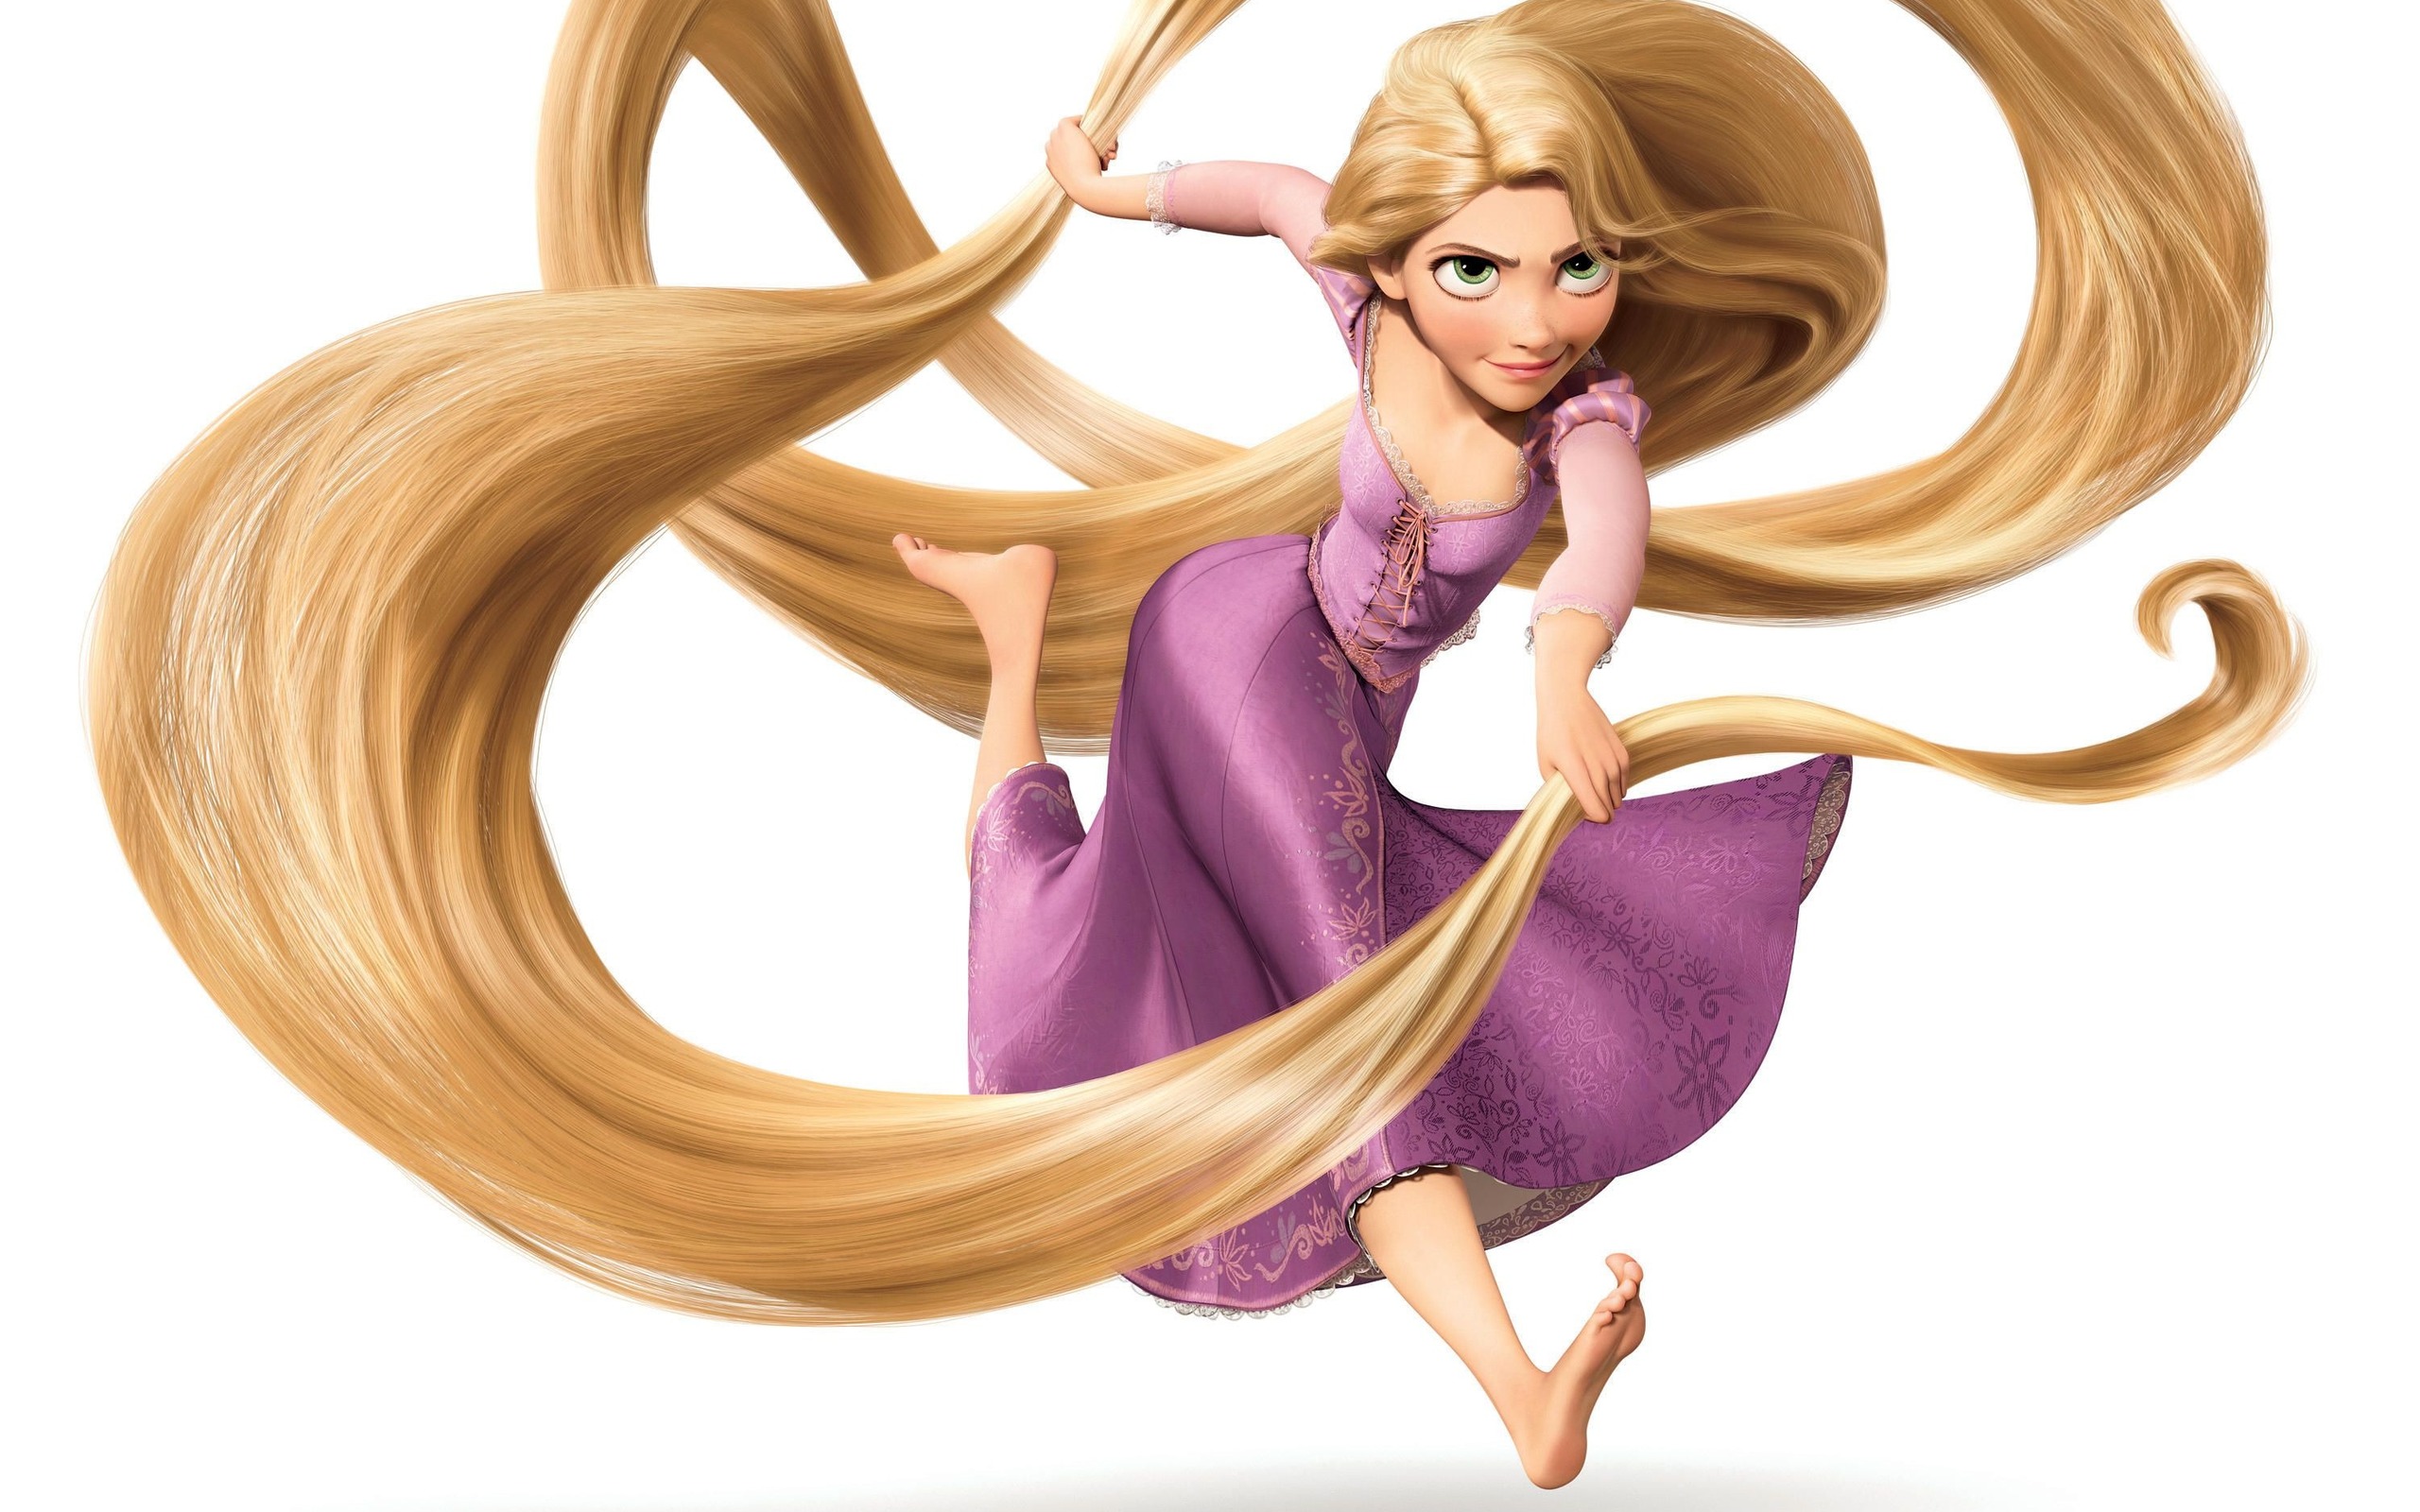 "Tangled",Long hair wallpapers and images - wallpapers, pictures, photos